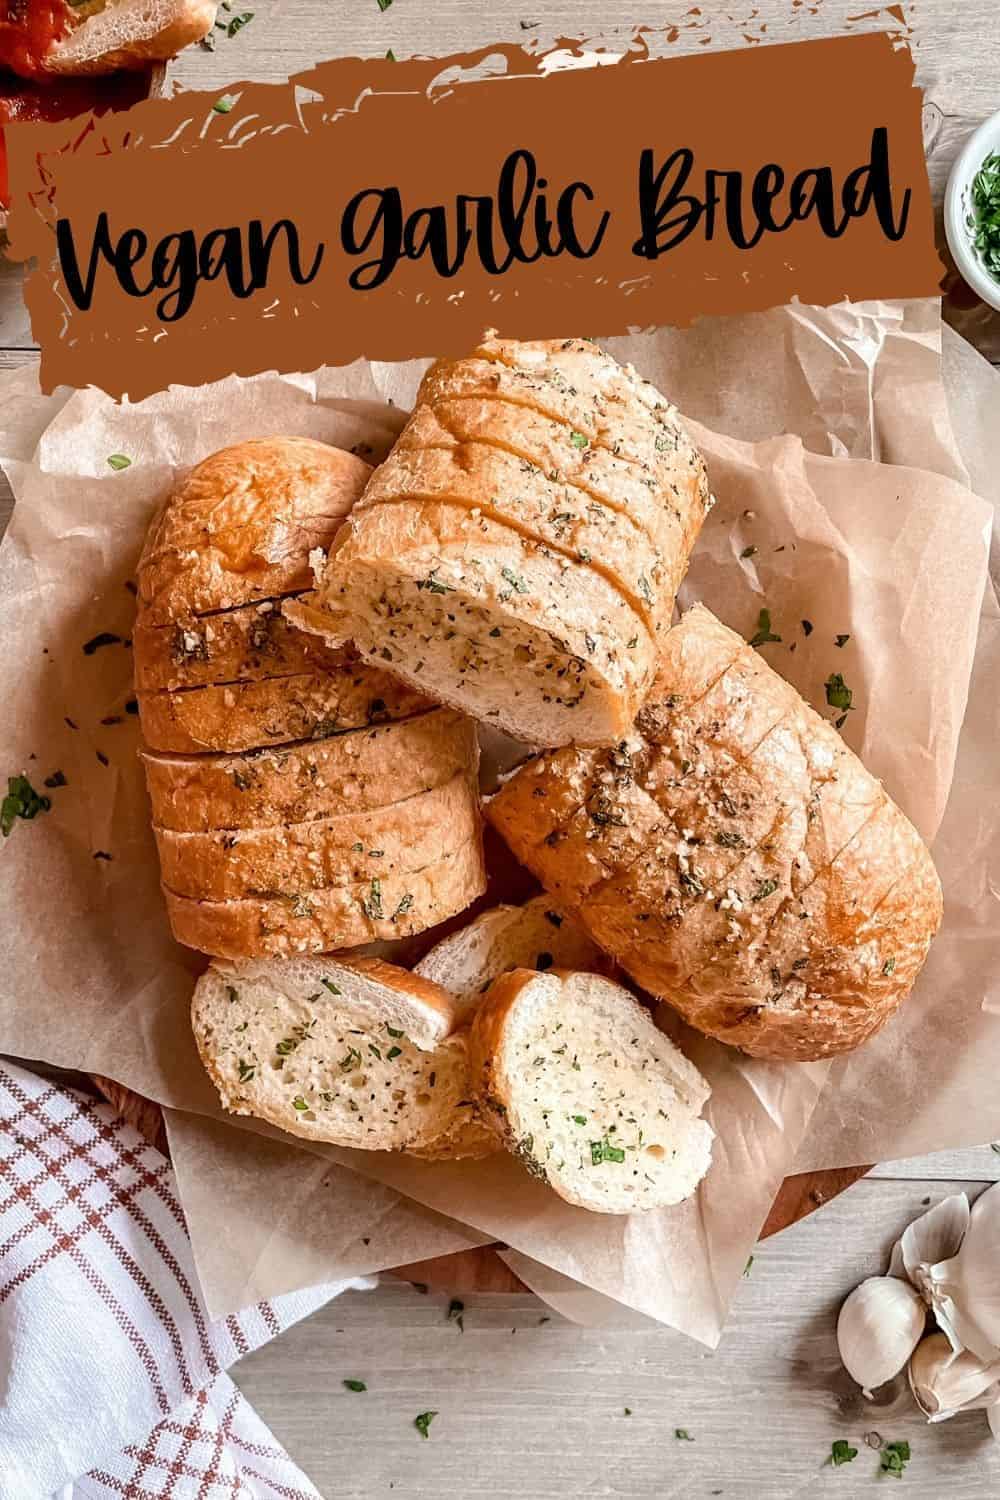 Main image of the vegan garlic bread with text overlay for pinterest